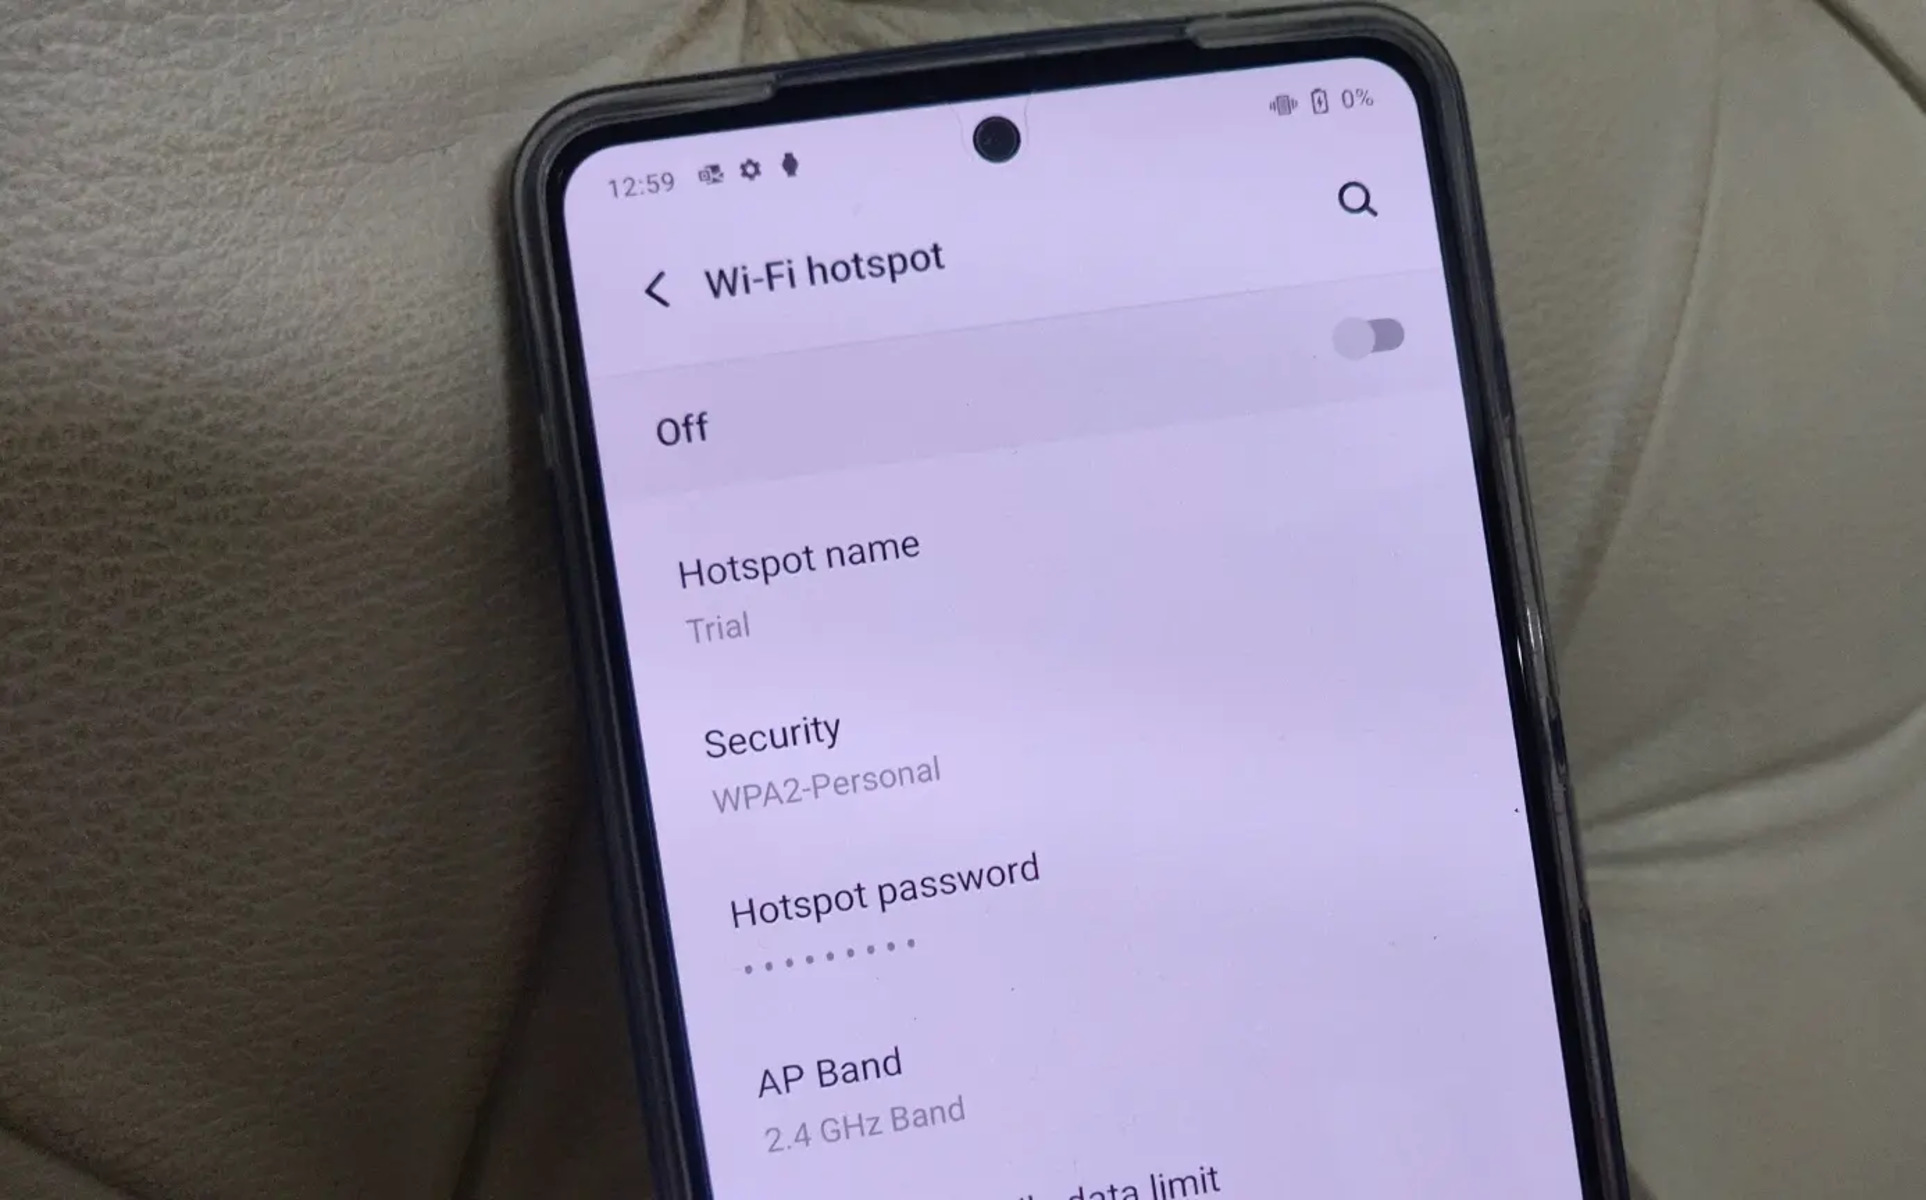 AP Band In Hotspot: Technical Overview